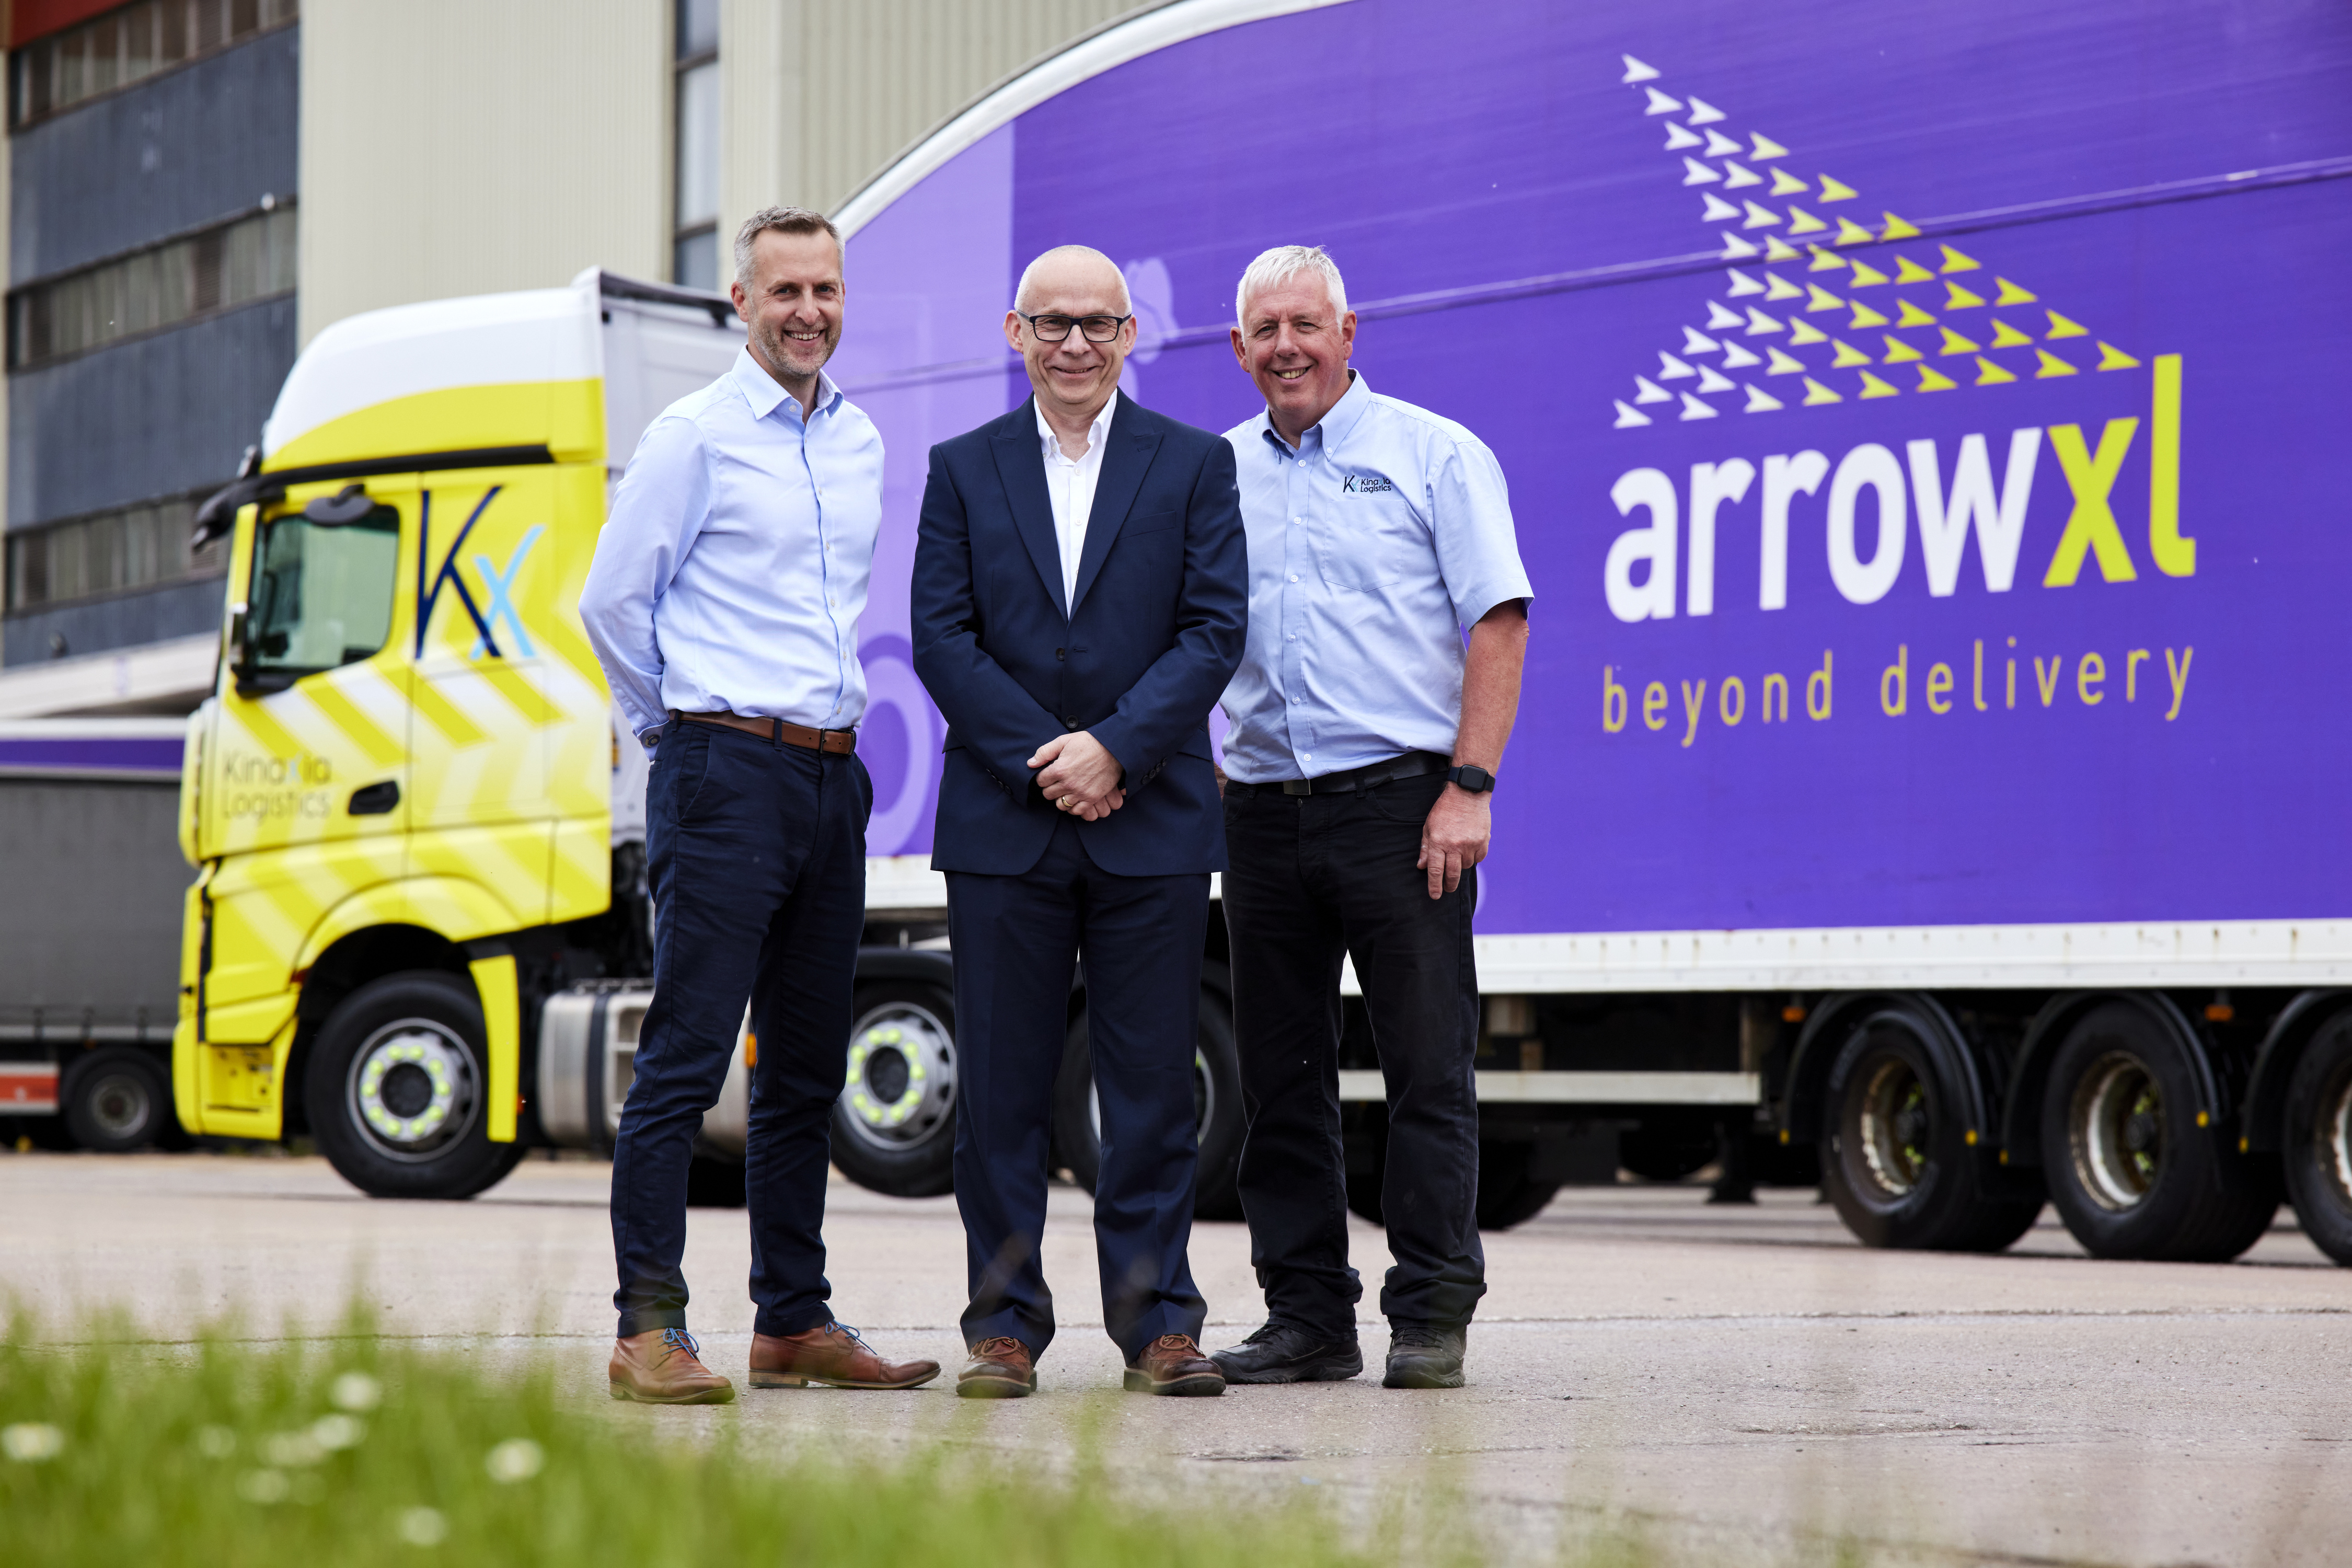 FIVE-YEAR CONTRACT AGREED WITH ARROWXL